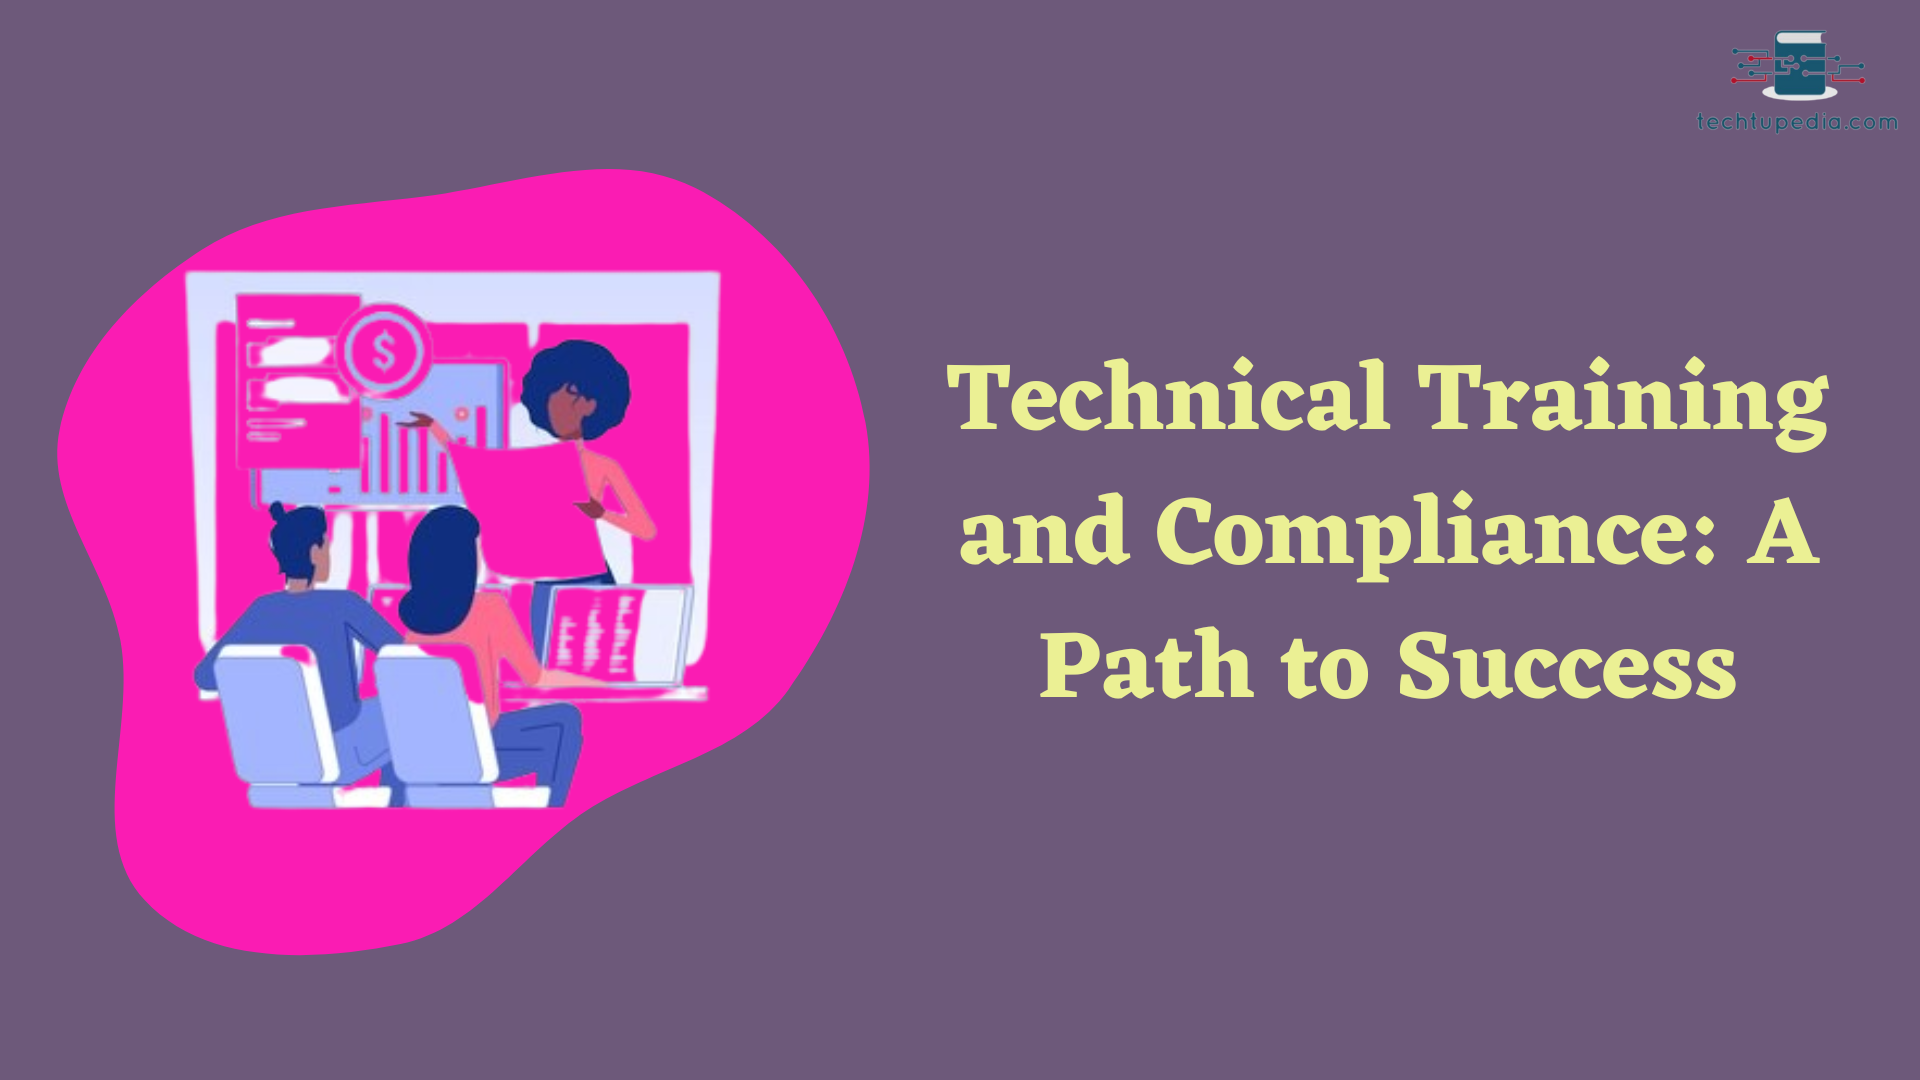 Technical Training and Compliance: A Path to Success